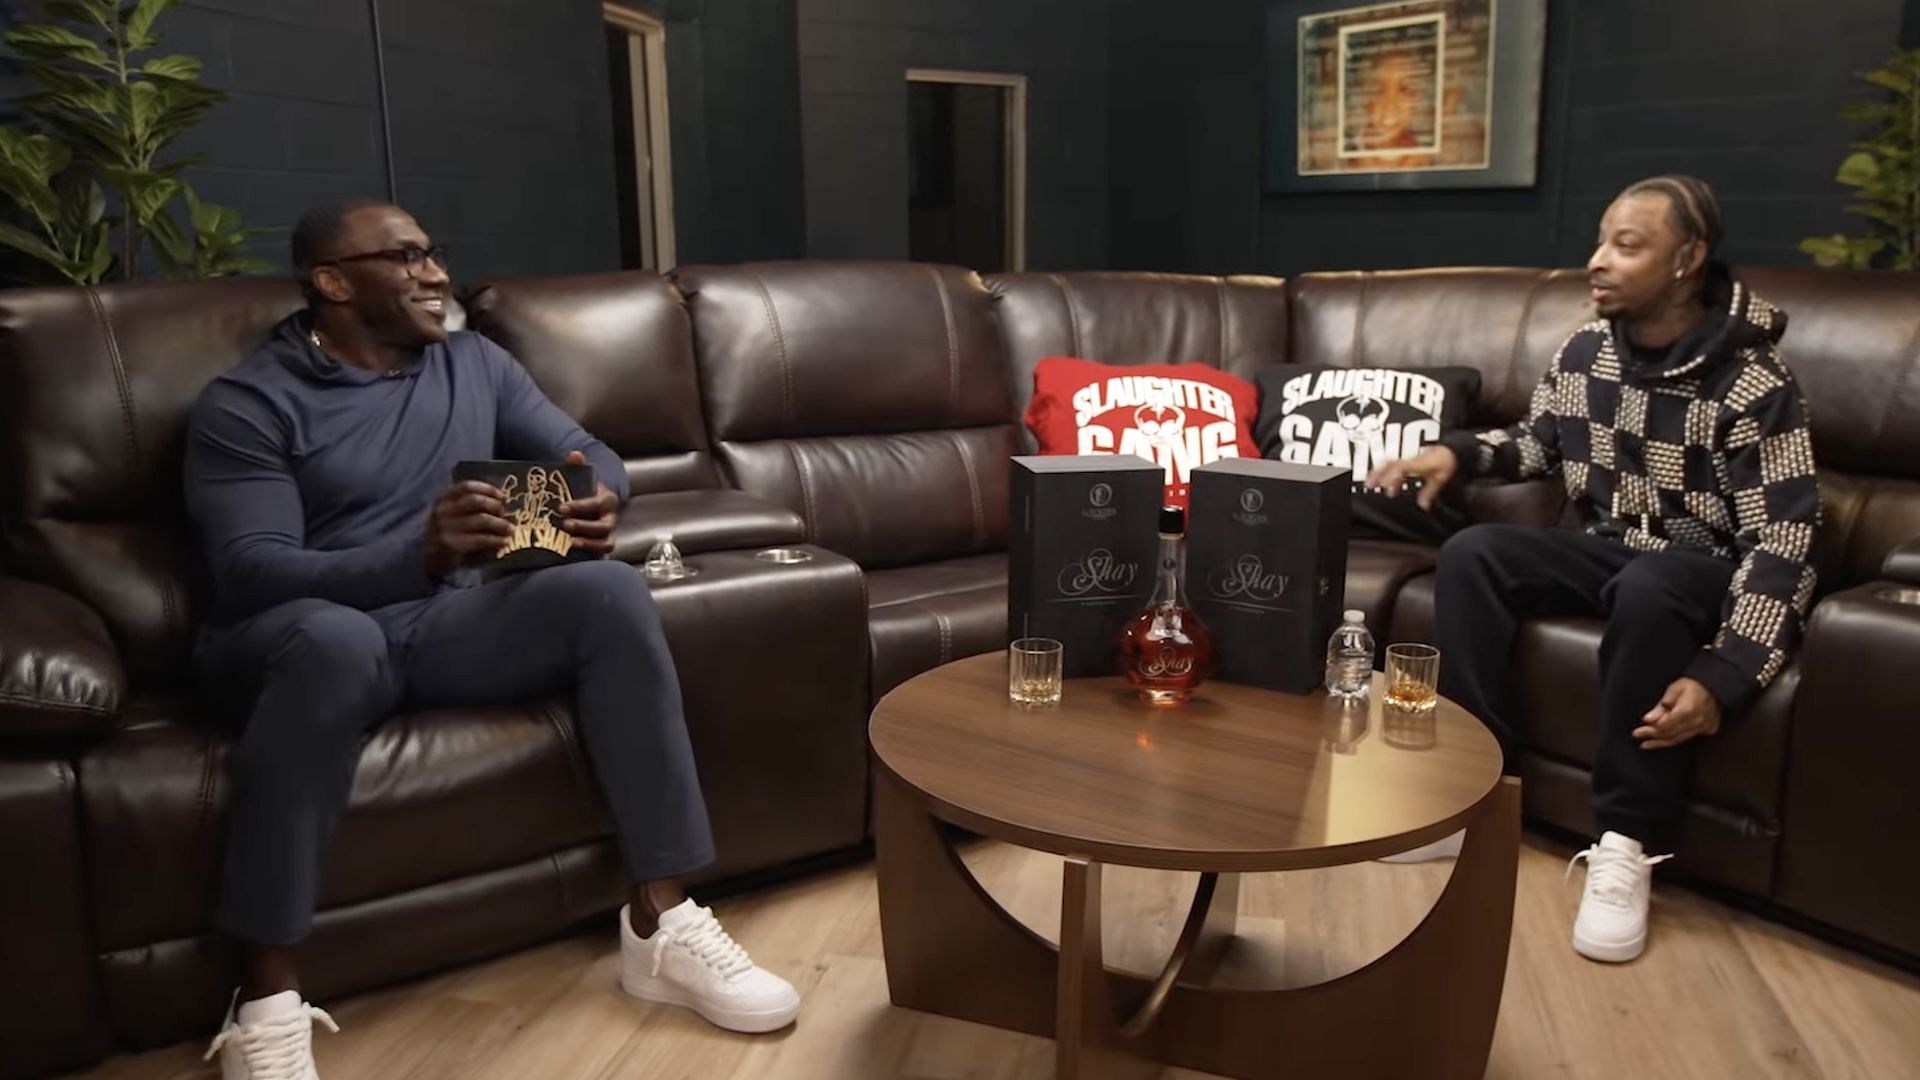 21 Savage sits down for an exclusive interview with Shannon Sharpe to discuss his album and more (Image via YouTube/@ClubShayShay)